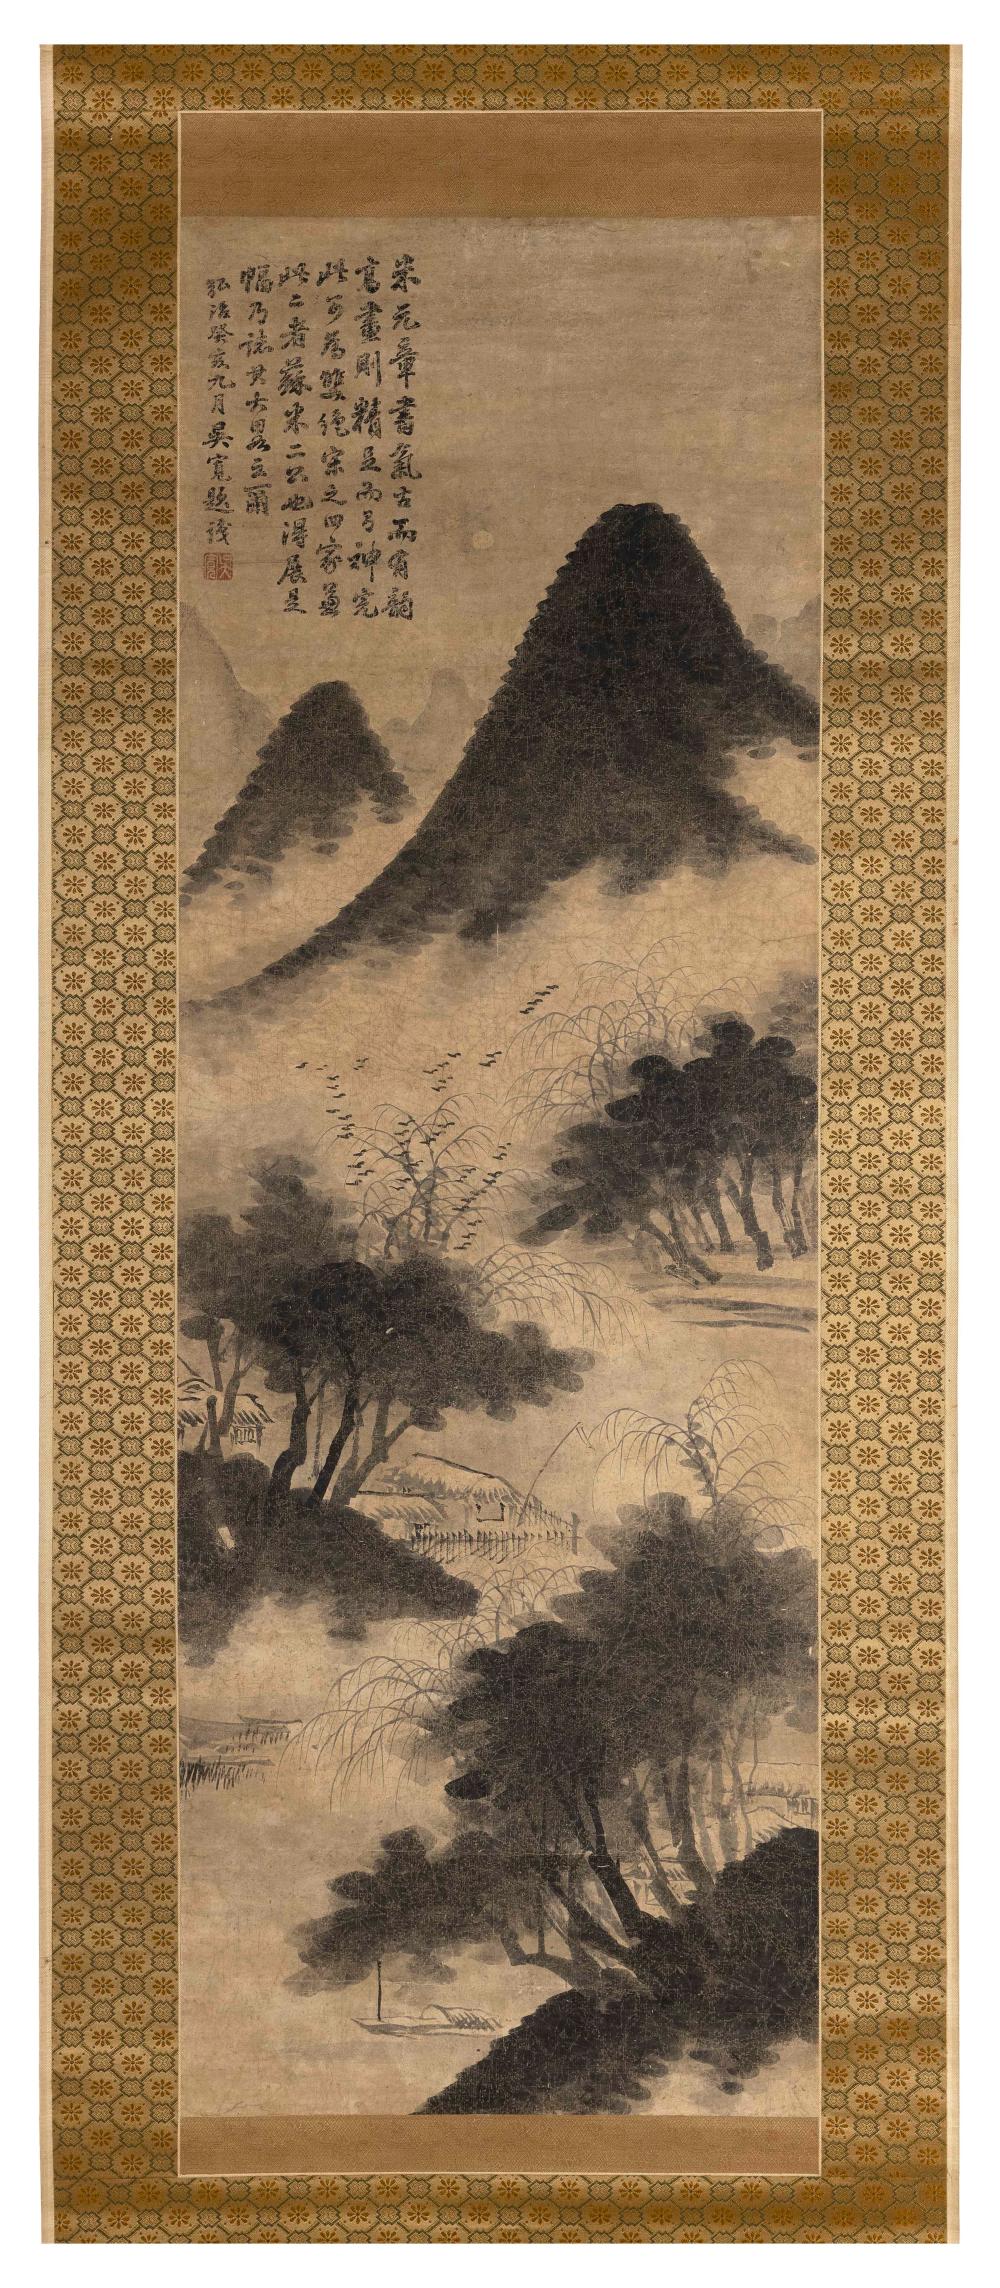 CHINESE SCROLL PAINTING 19TH CENTURY